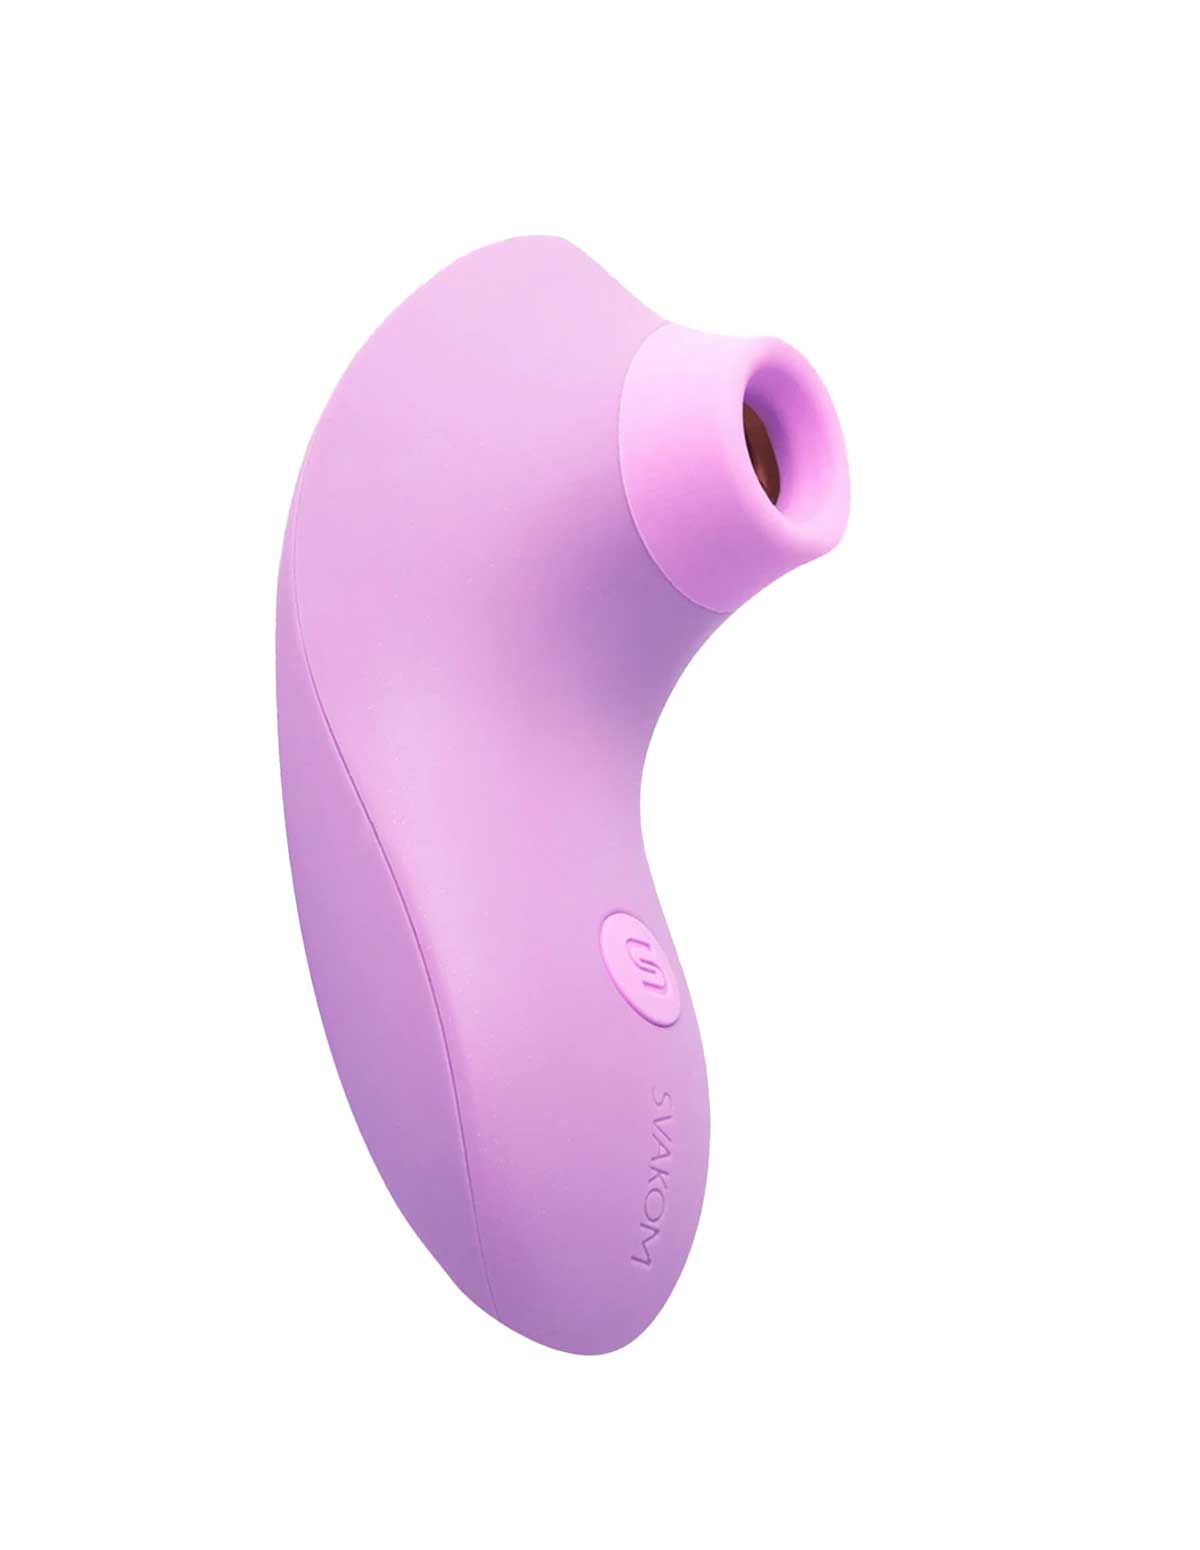 alternate image for Pulse Lite Neo - Interactive Suction Stimulator With App